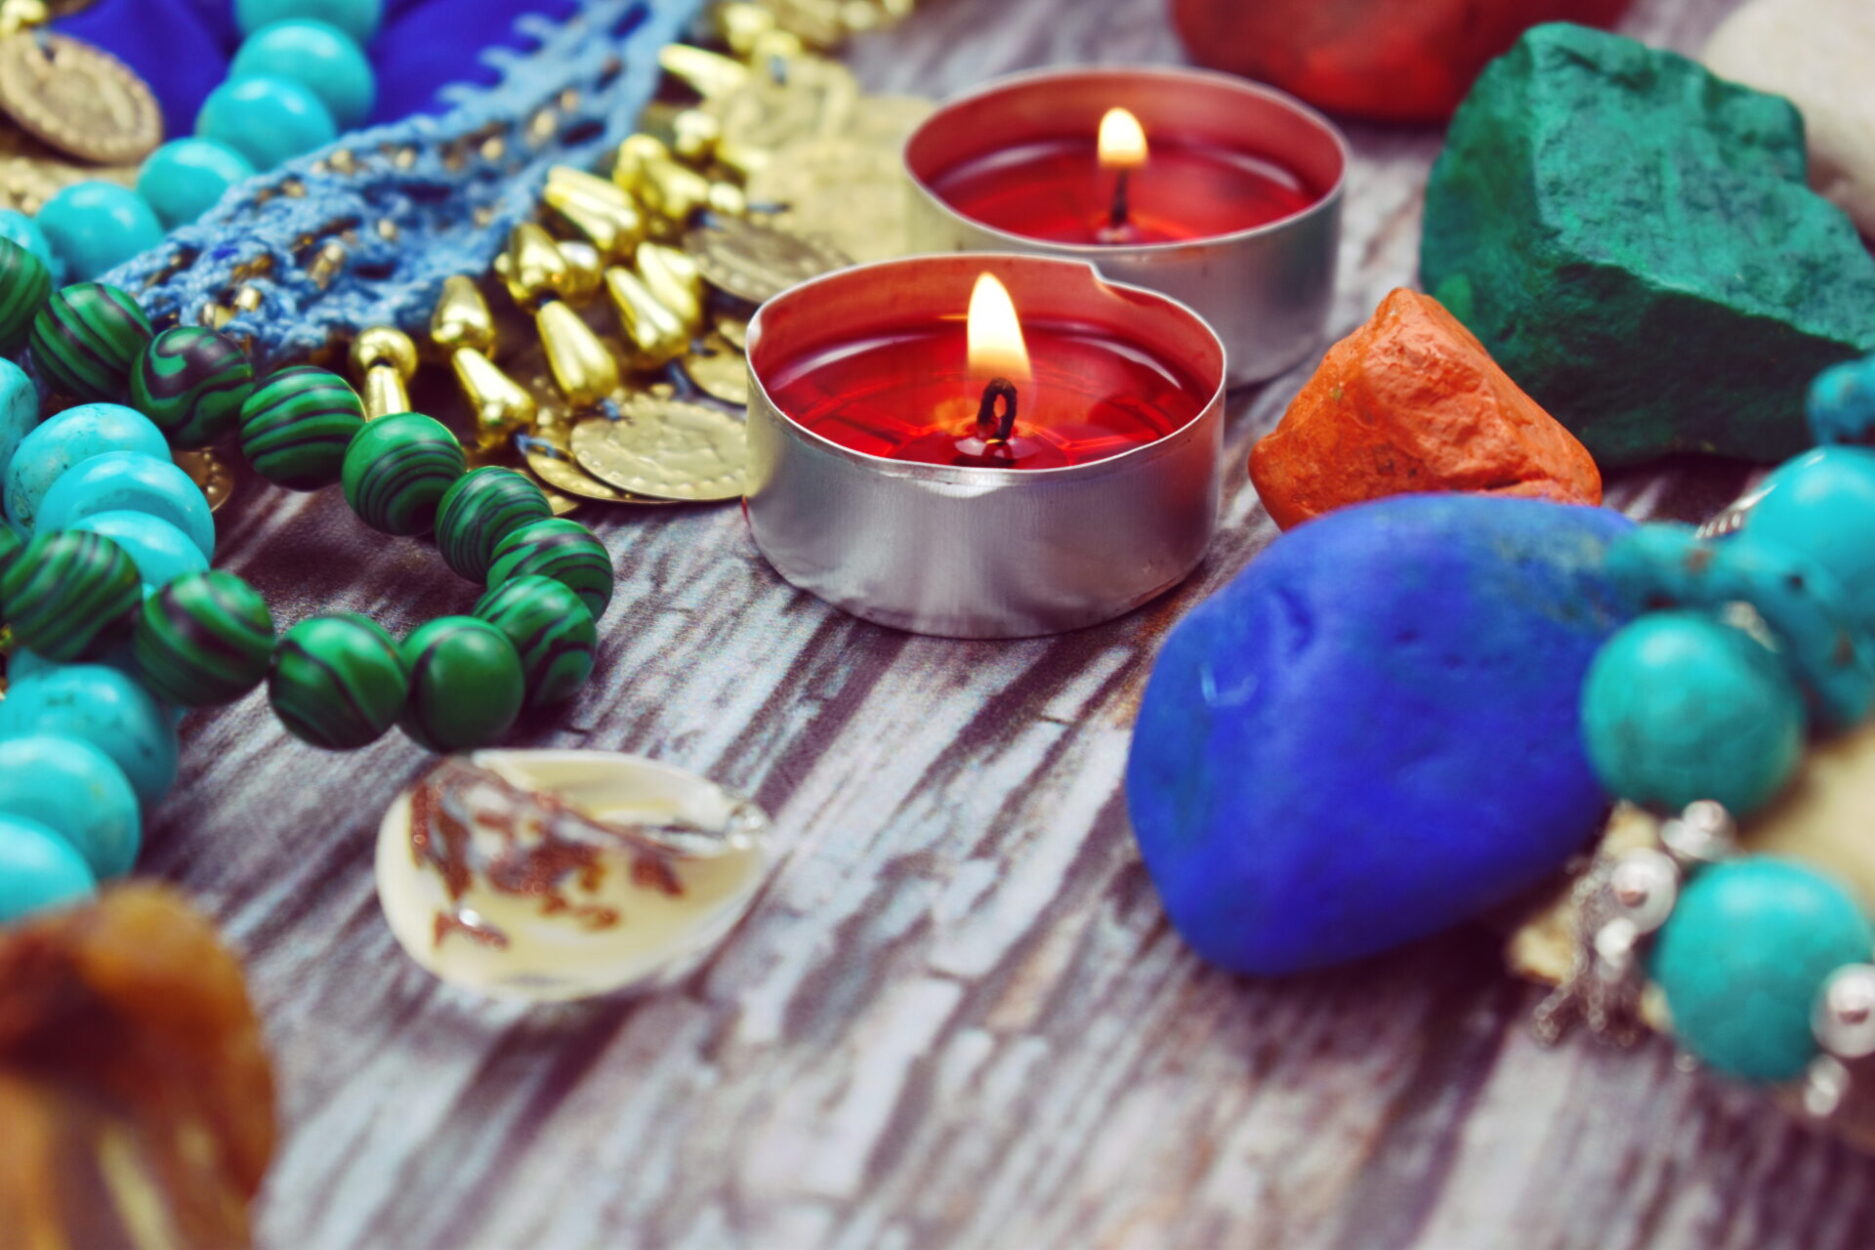 How Wearing Spiritual Items Can Change Your Outlook In Life